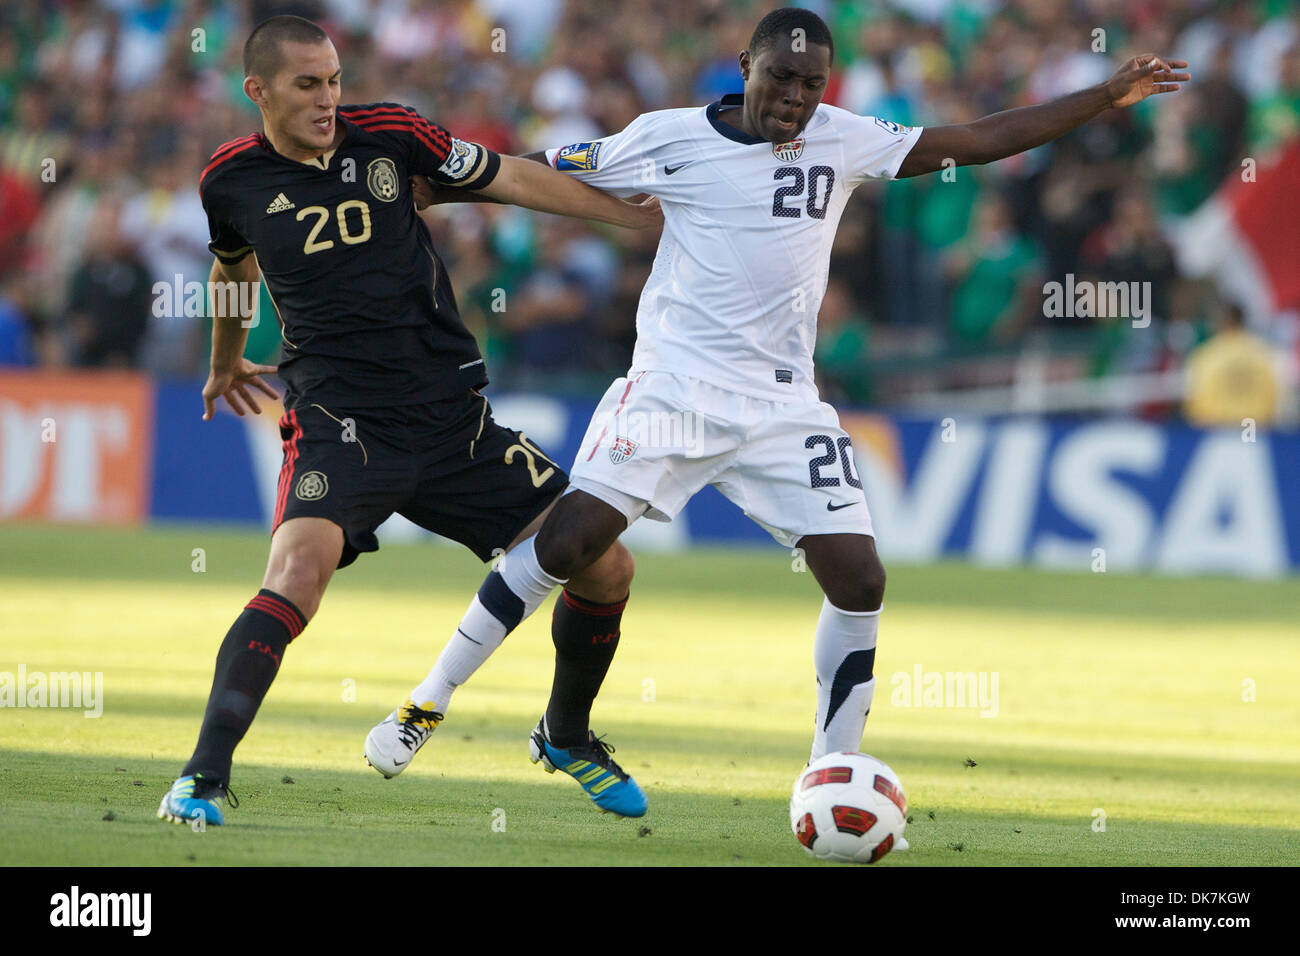 June 25, 2011 - Pasadena, California, United States of America - United States midfielder Freddy Adu (20) and Mexican midfielder Jorge Torres Nilo battle for the ball, during the 2011 CONCACAF Gold Cup Final match, between the U.S. National Team and the Mexico National Team, at the Rose Bowl in Pasadena, California.  Mexico would go on to defeat the U.S. 4-2 to capture the Gold Cup Stock Photo